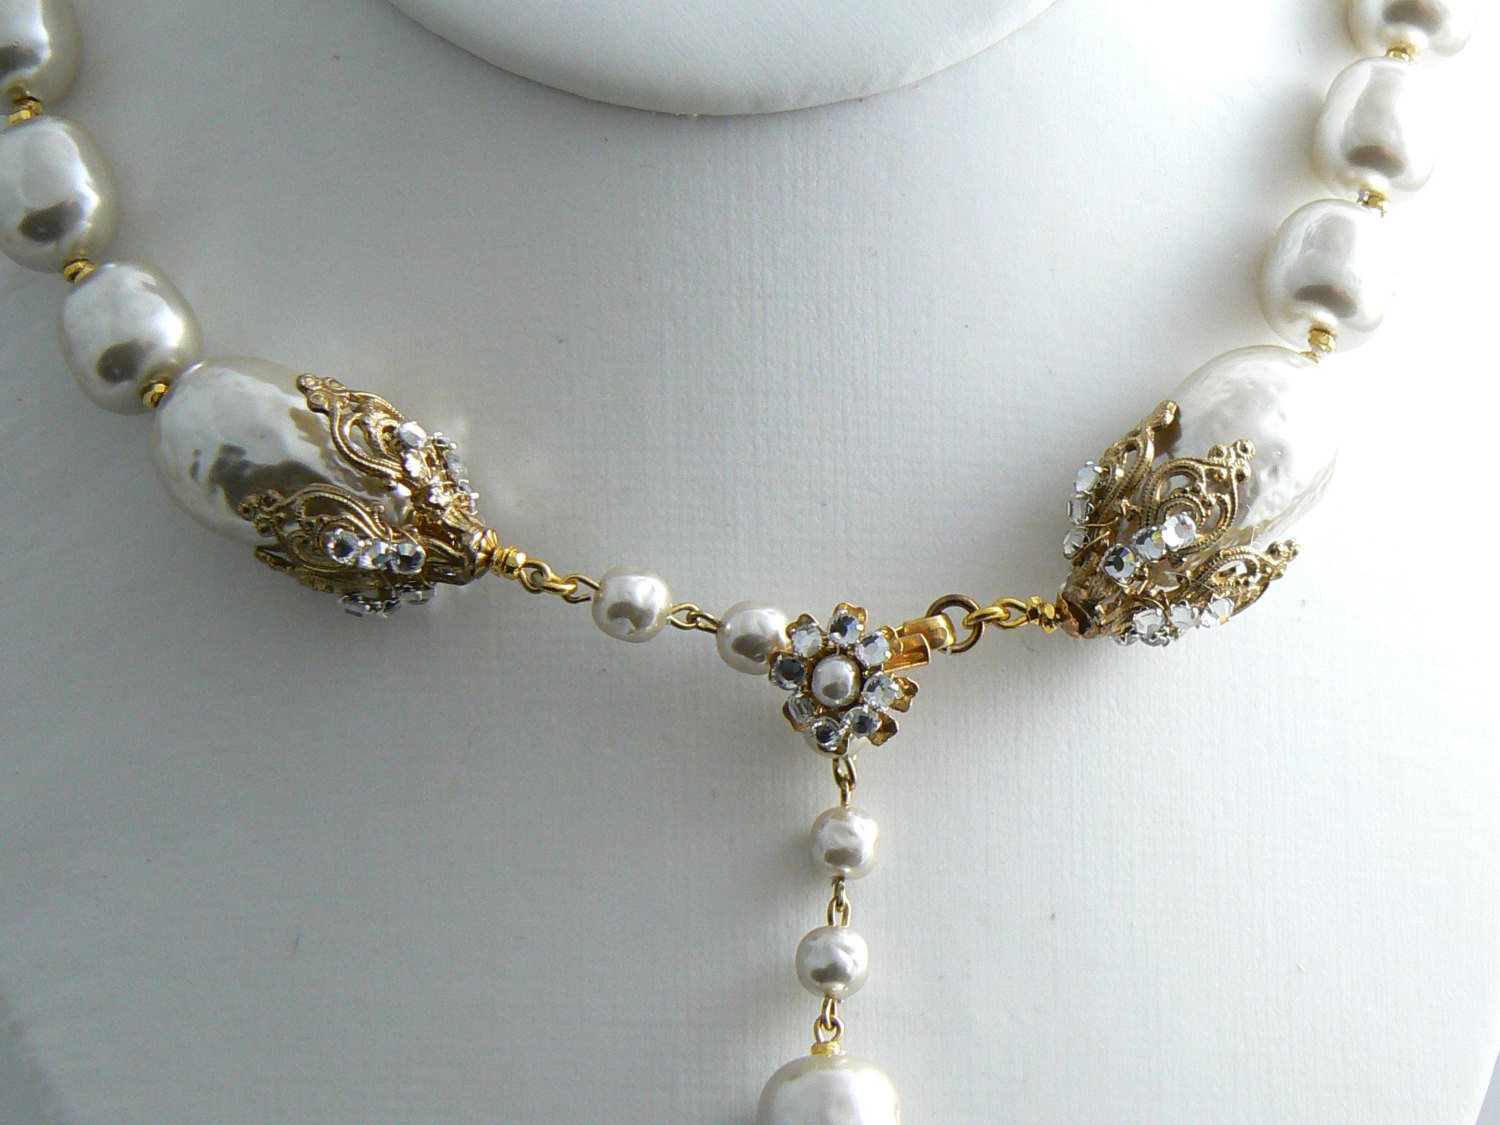 Huge Signed Miriam Haskell Necklace Pear-Shape Baroque Pearls with ...